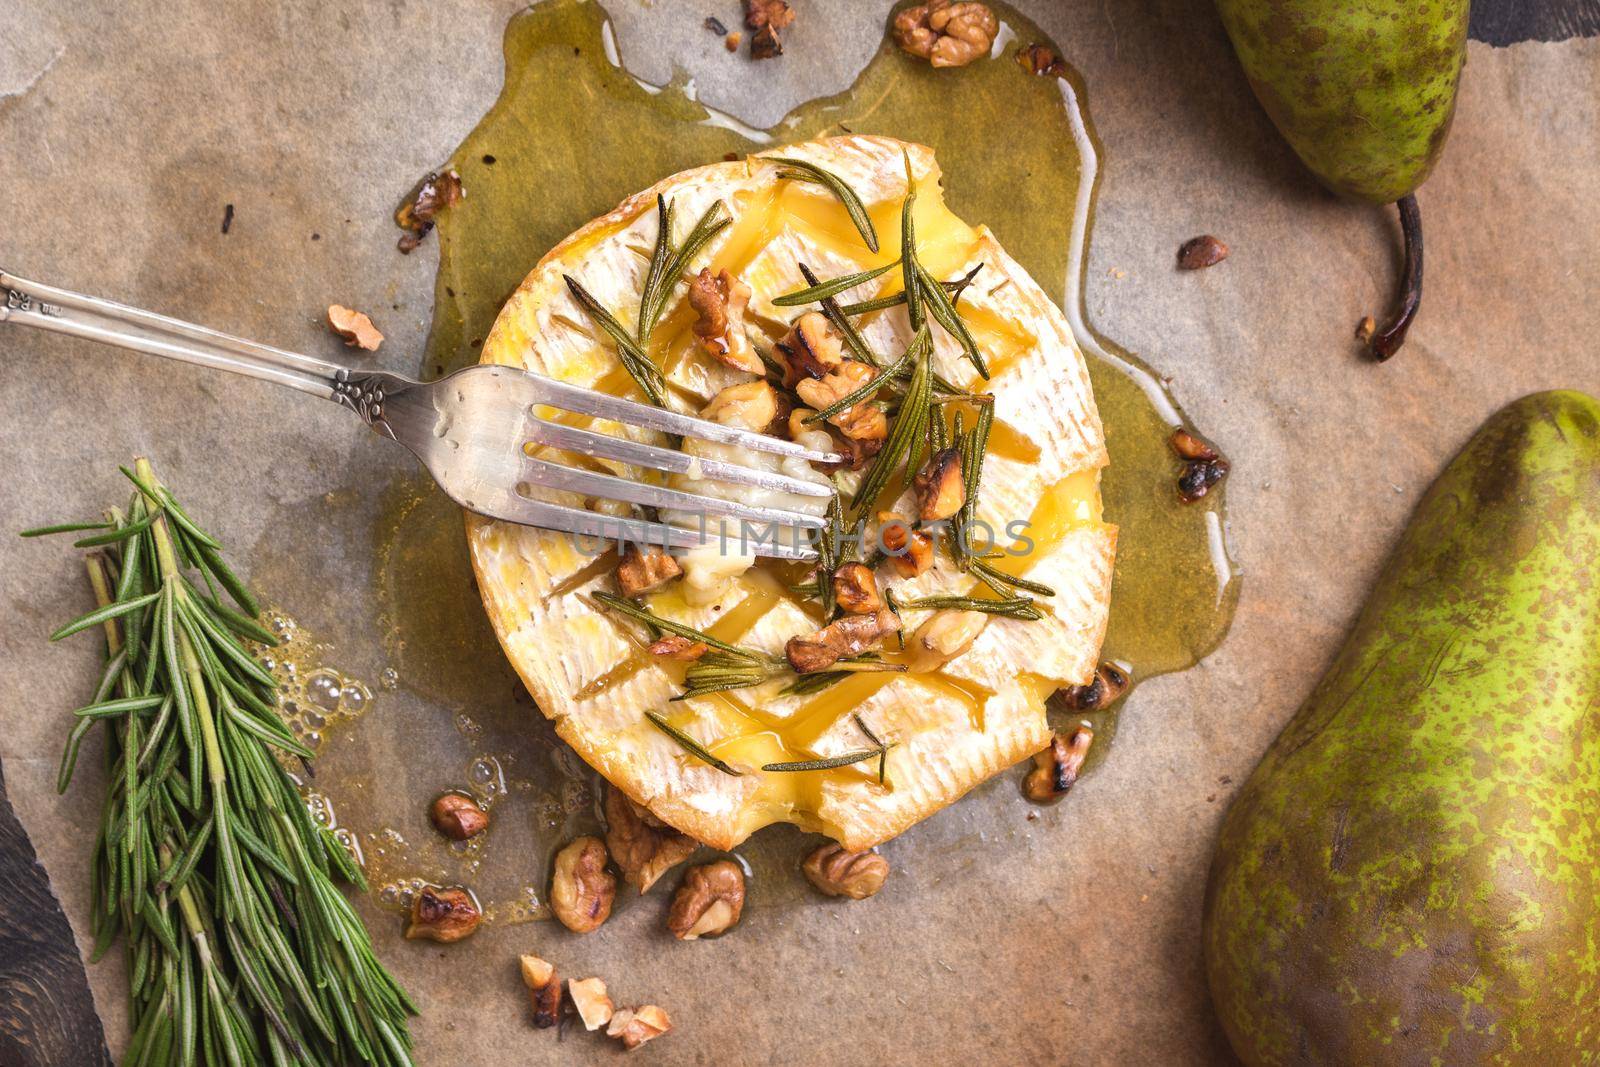 Delicious beautiful baked camembert with fork. Cheese with honey, walnuts, herbs and pears